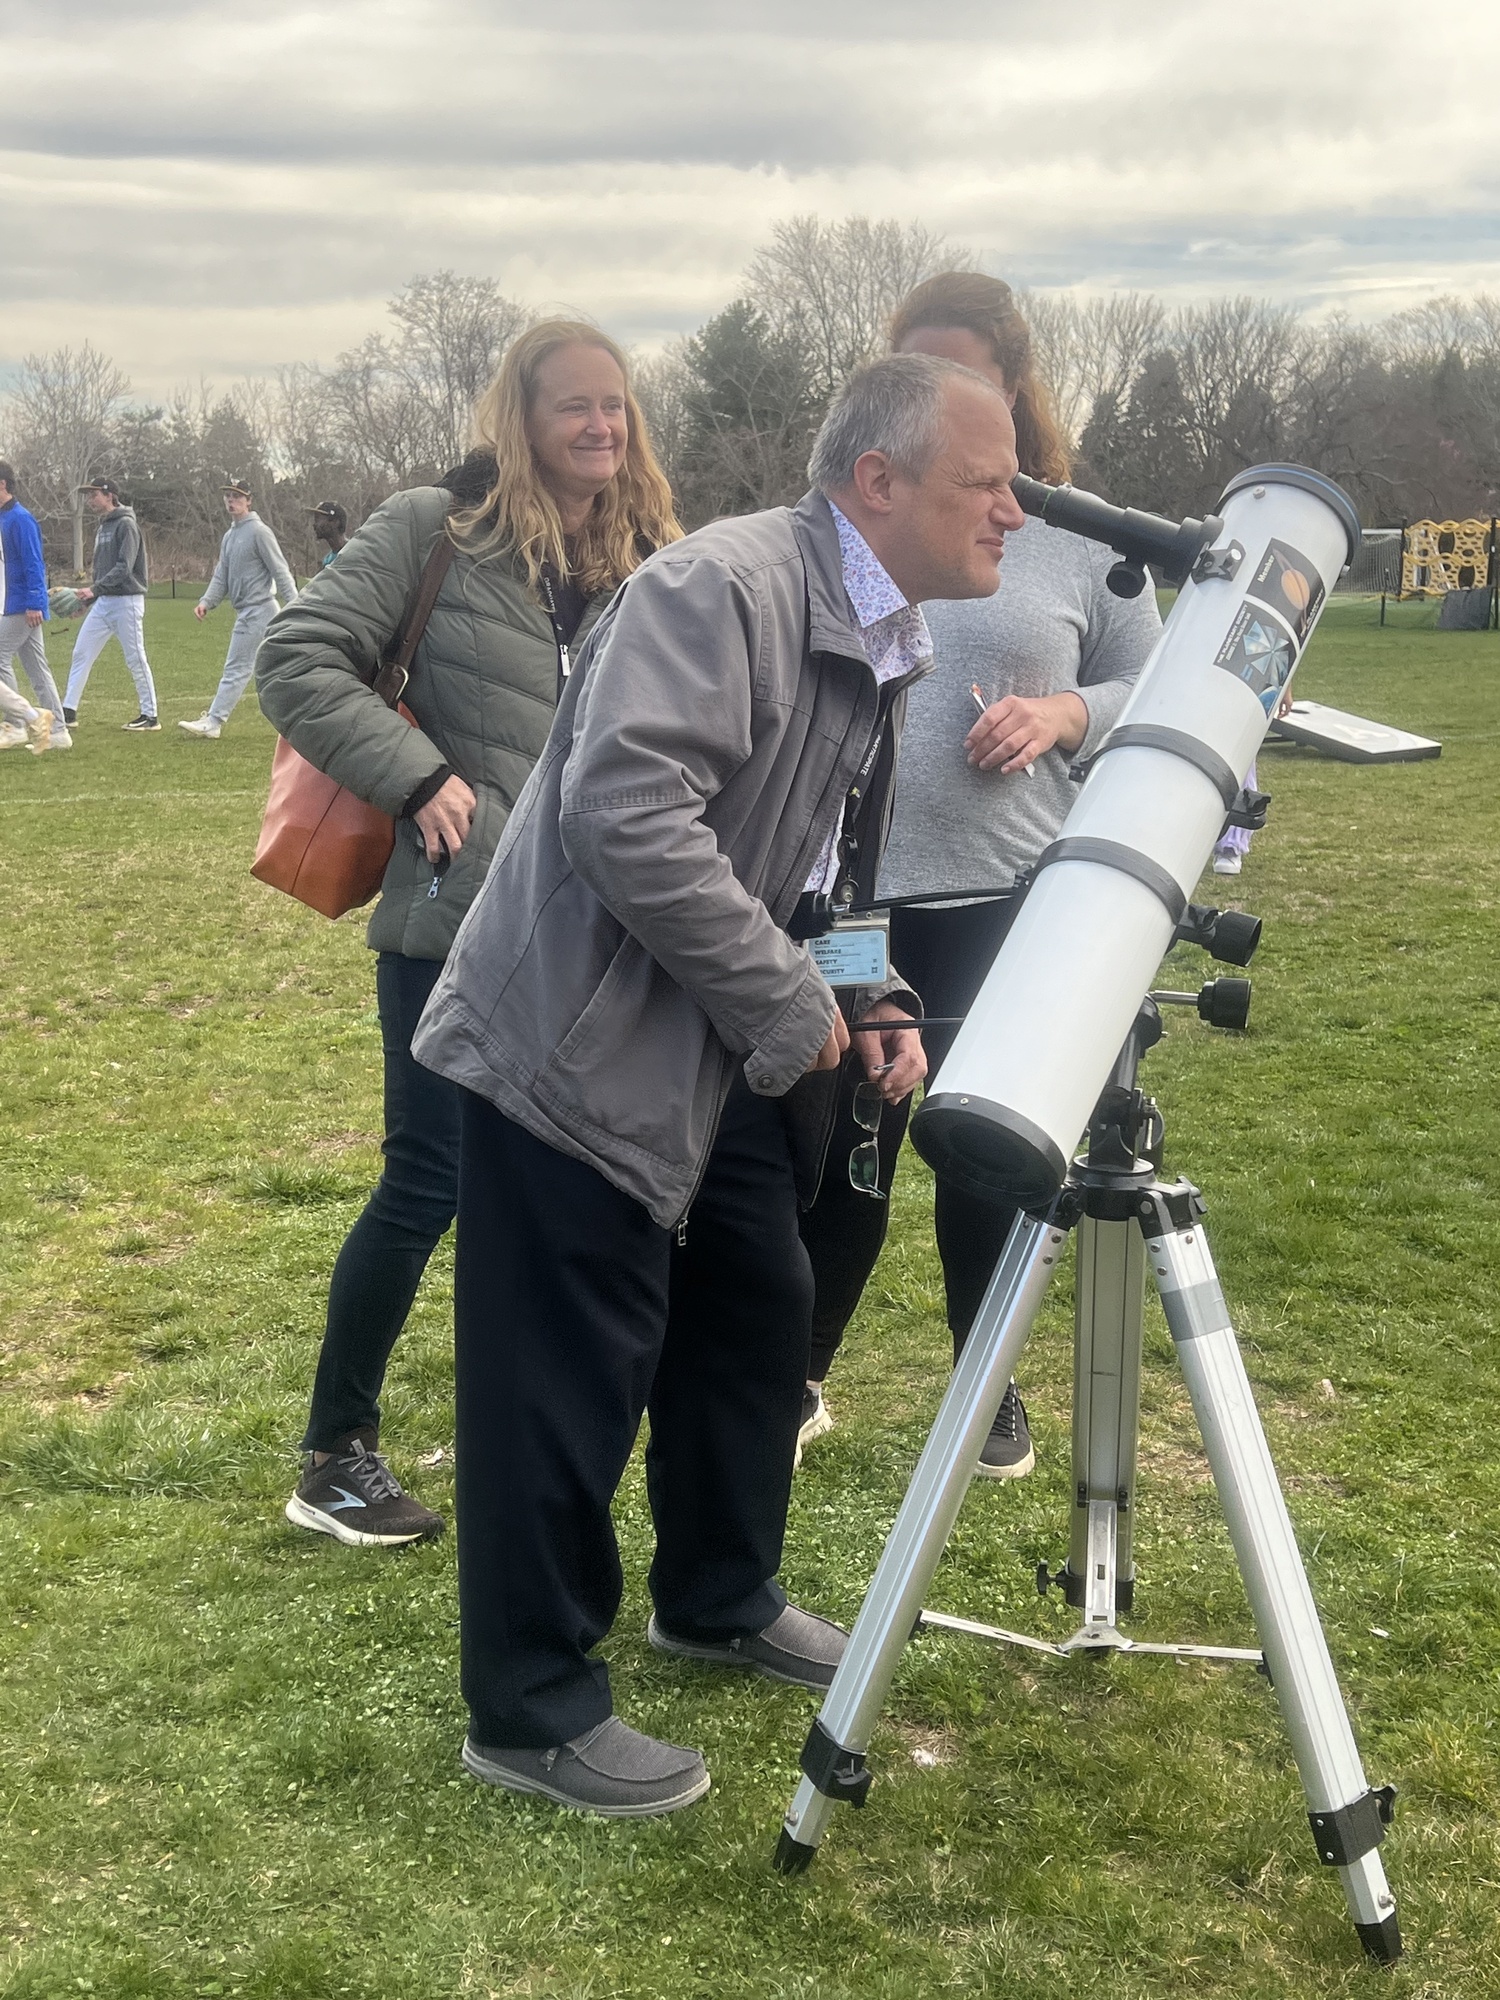 Bridgehampton Union Free School District and community members gathered for a showing of the solar eclipse on April 8. With the protection of eclipse glasses, everyone was able to witness the incredible event. Cheryl Nordt and Mike Sherman. COURTESY BRIDGEHAMPTON SCHOOL DISTRICT